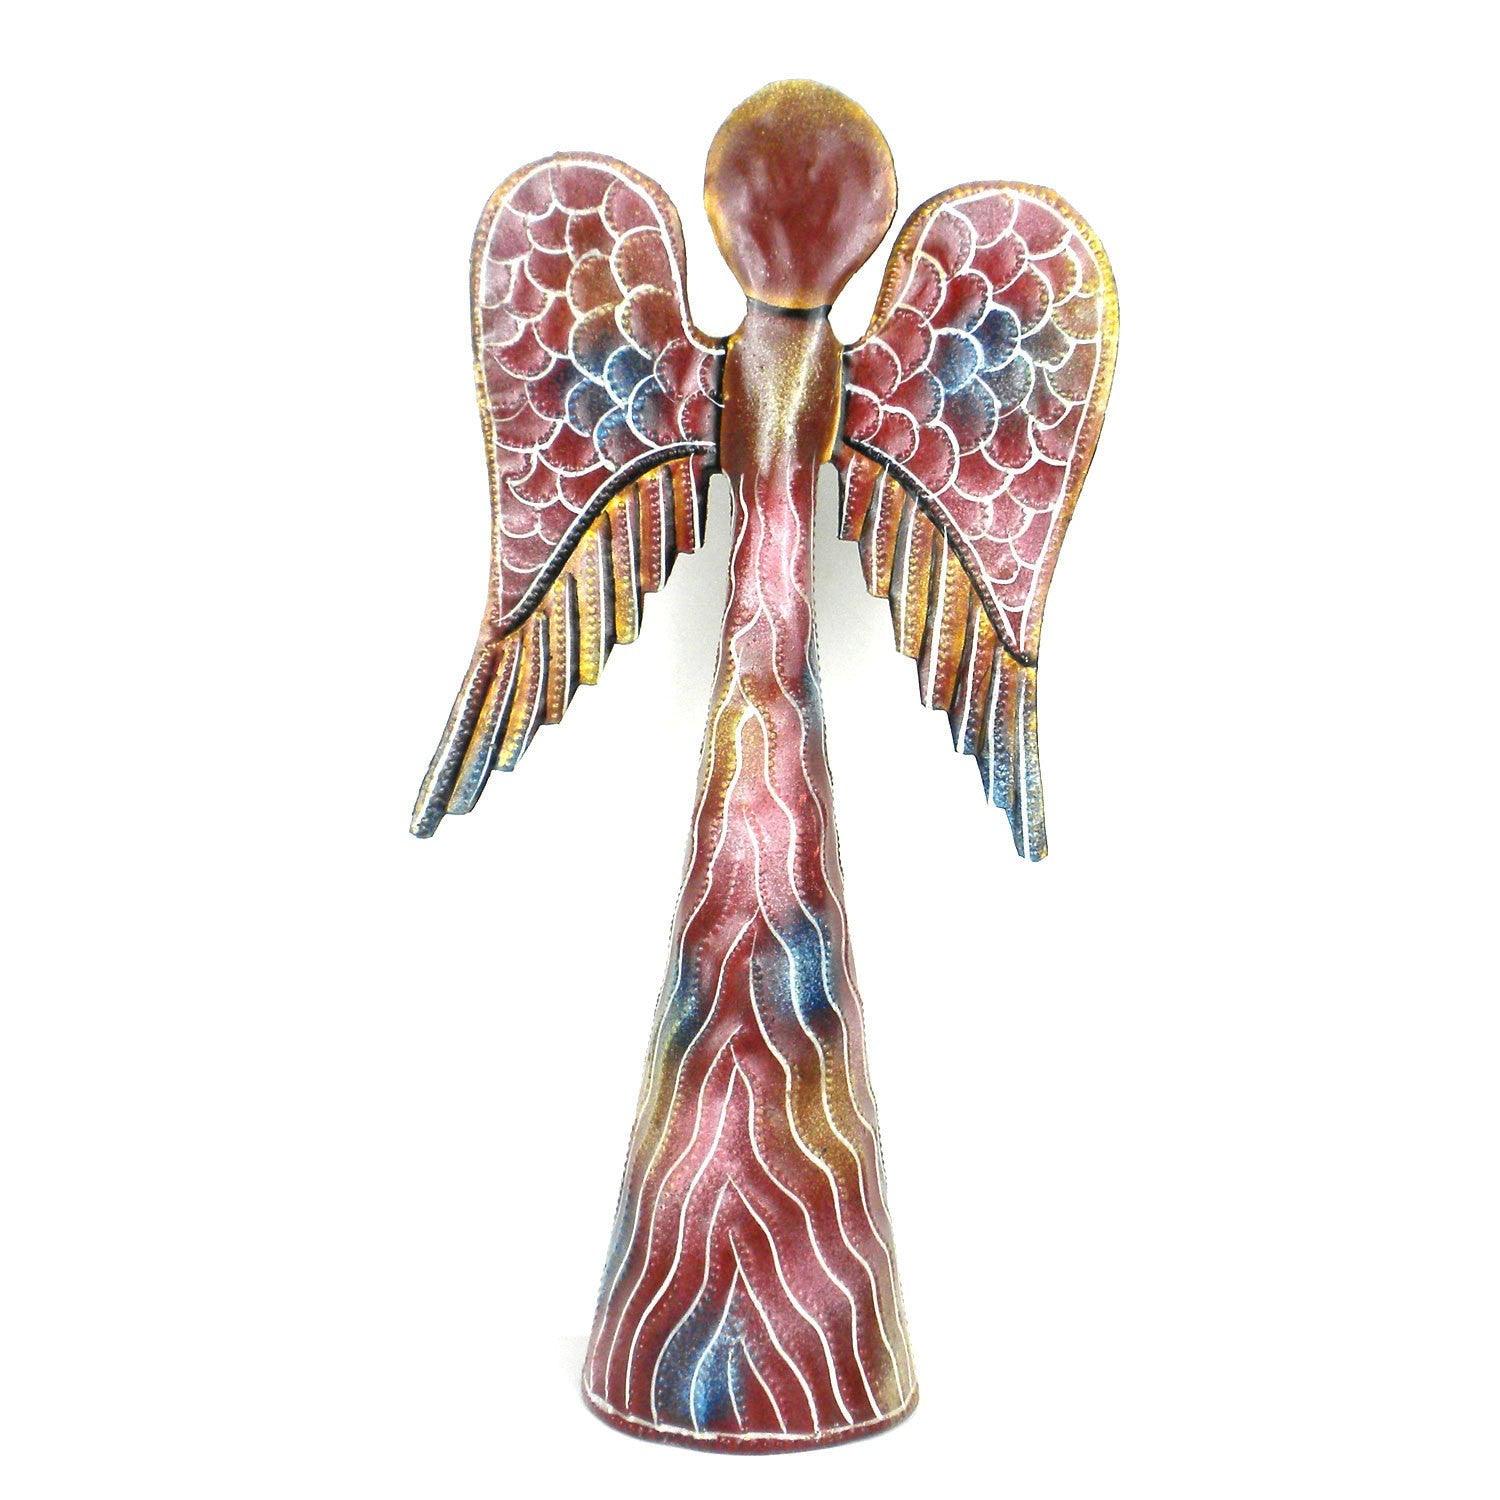 12-inch Hand Painted Metalwork Angel - Pink - Croix des Bouquets (H) - Flyclothing LLC